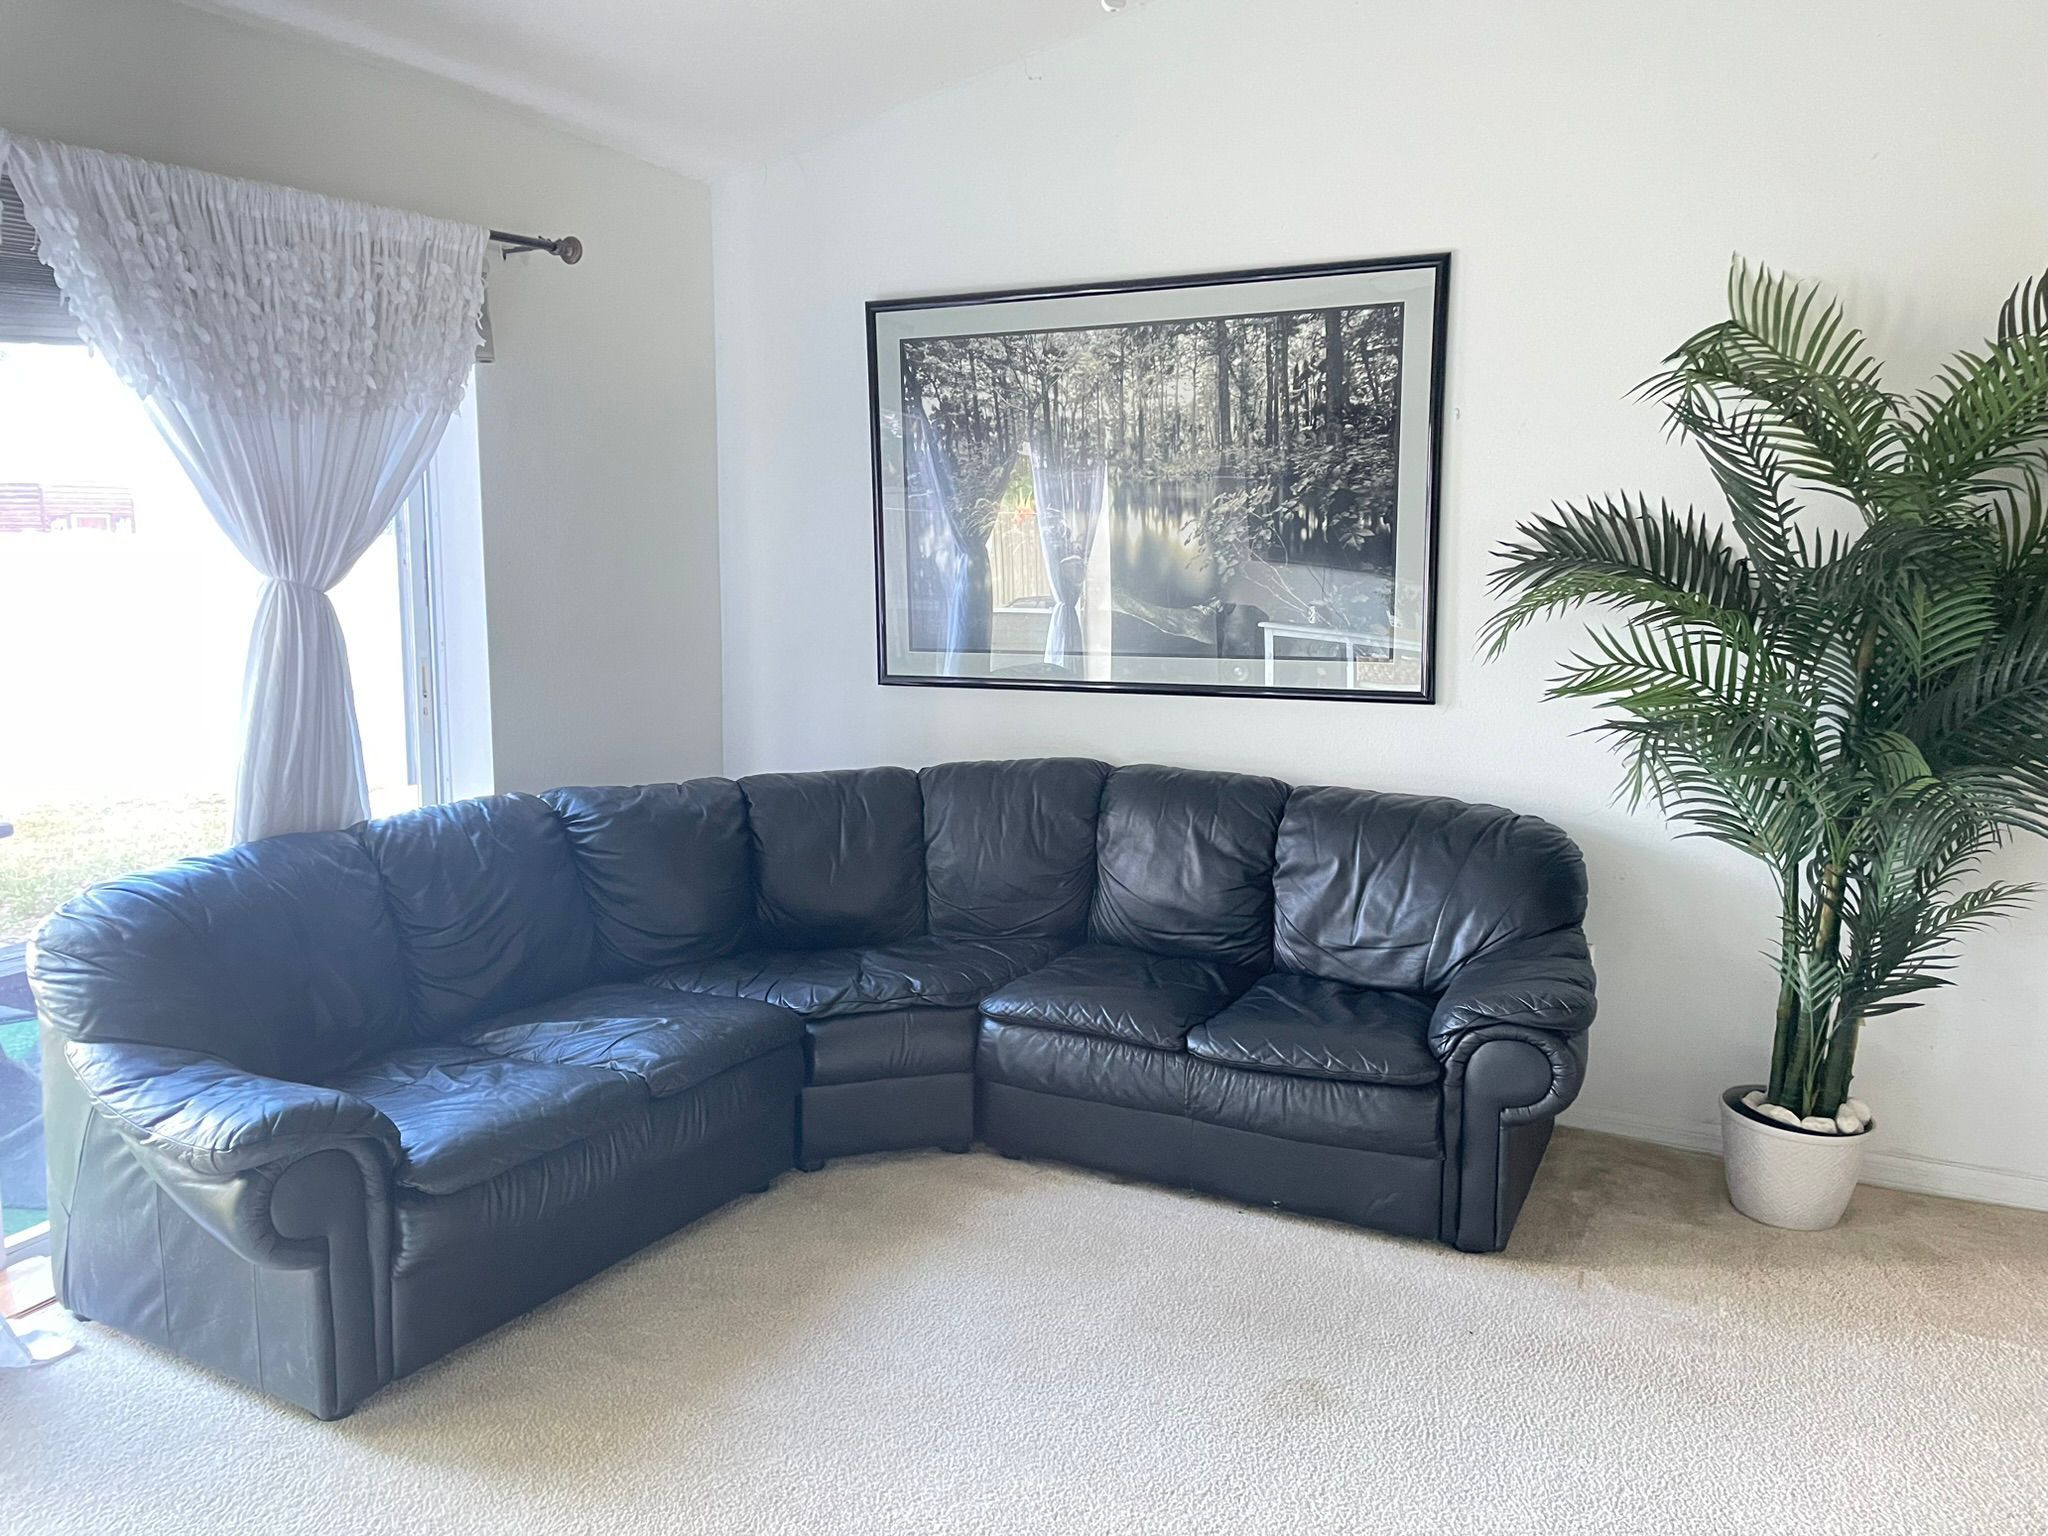  “GENUINE LEATHER” BLACK SECTIONAL 